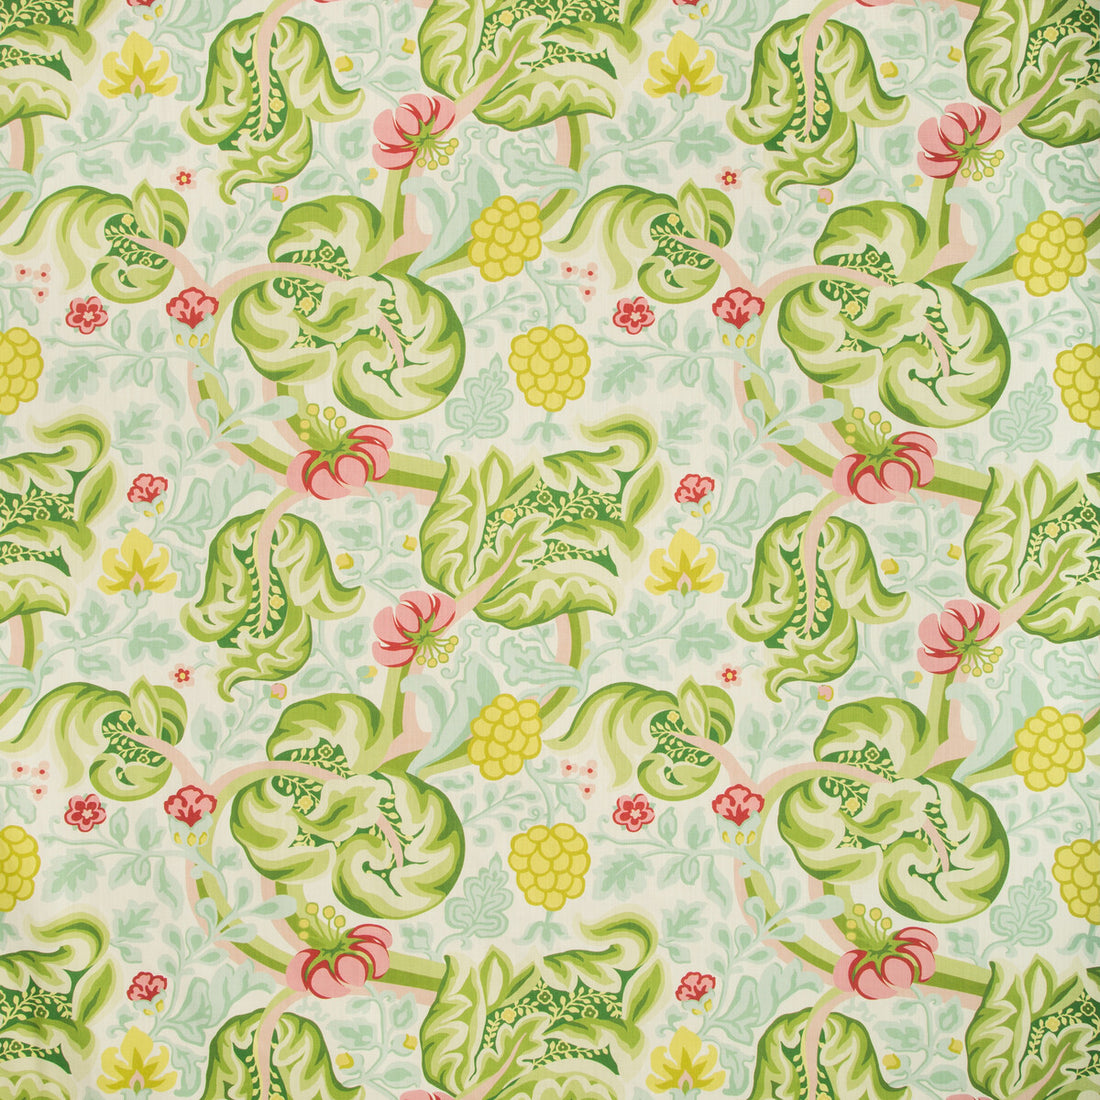 Hullabaloo fabric in parrot color - pattern HULLABALOO.317.0 - by Kravet Basics in the Bermuda collection